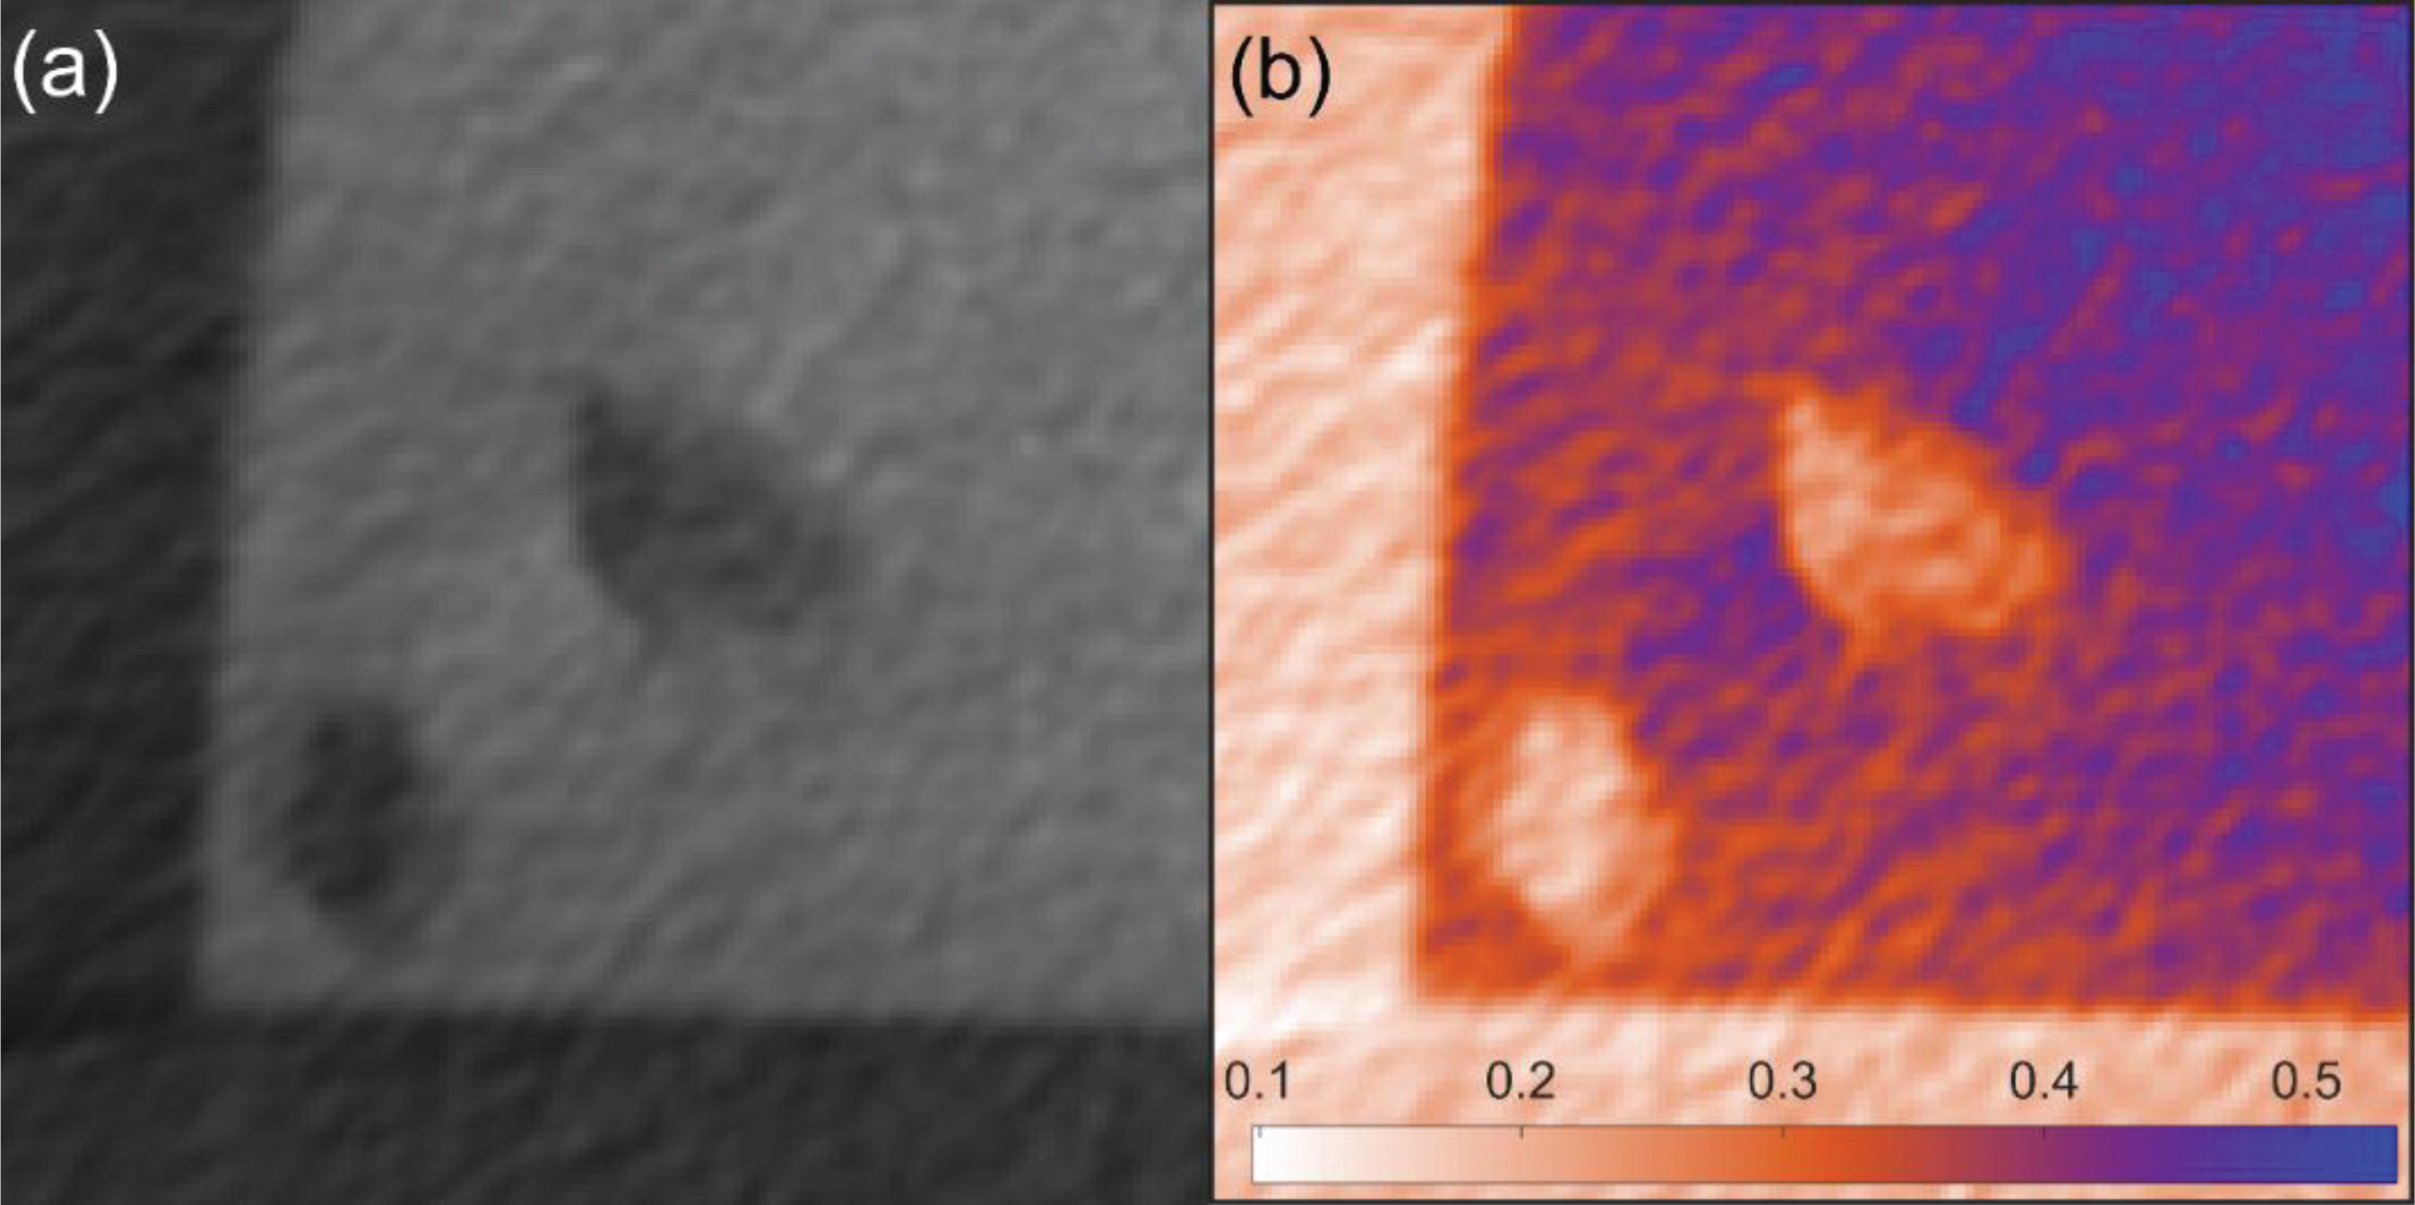 (a) A CT image from steel column showing corner and voids with poor contrast, and (b) its grey value distribution highlighted by a red/blue colour transform.